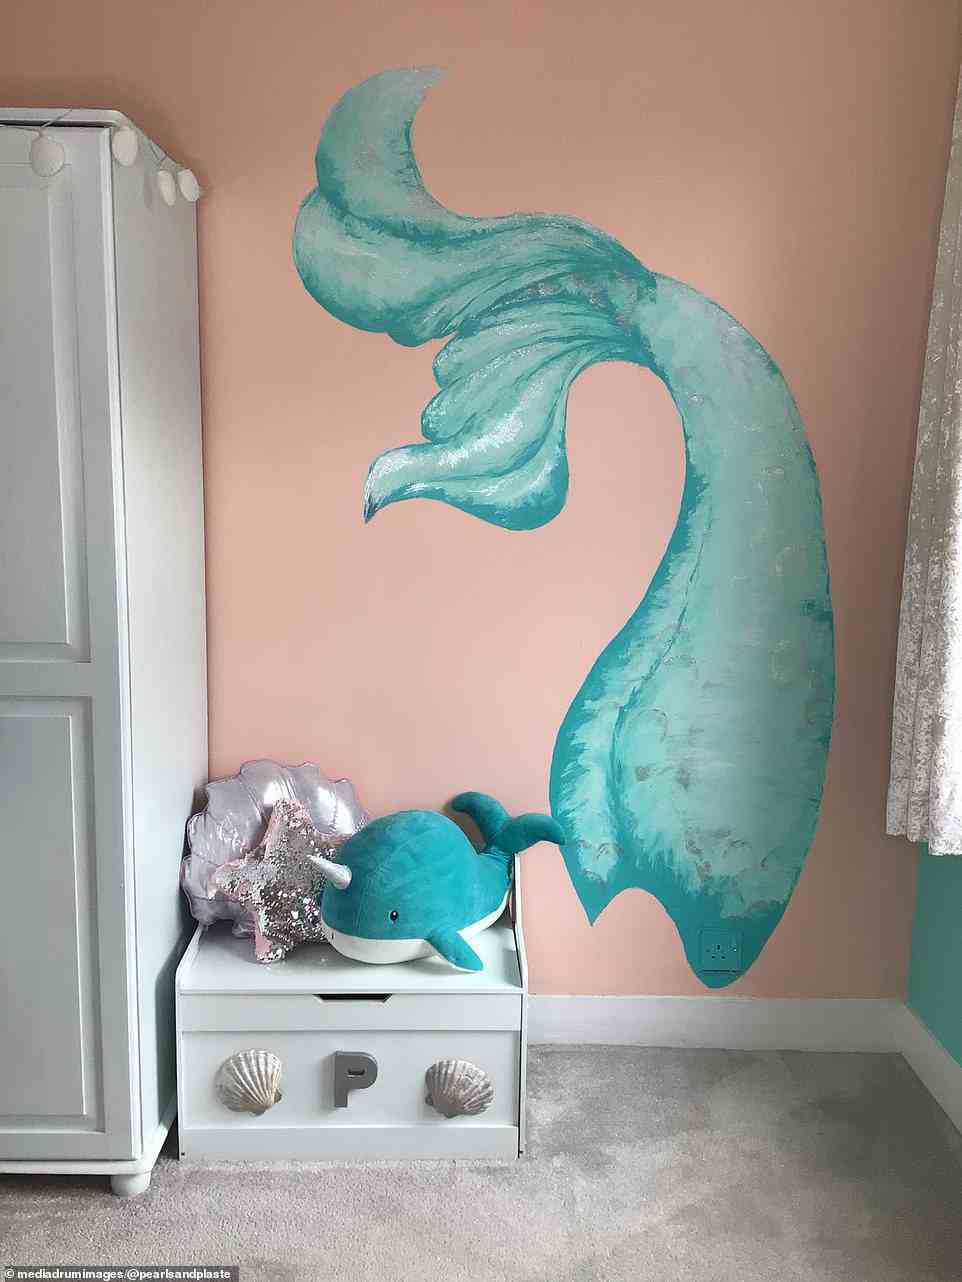 Adding plumbing, and wallpapering, as well as adding some colourful paintwork, transformed the space